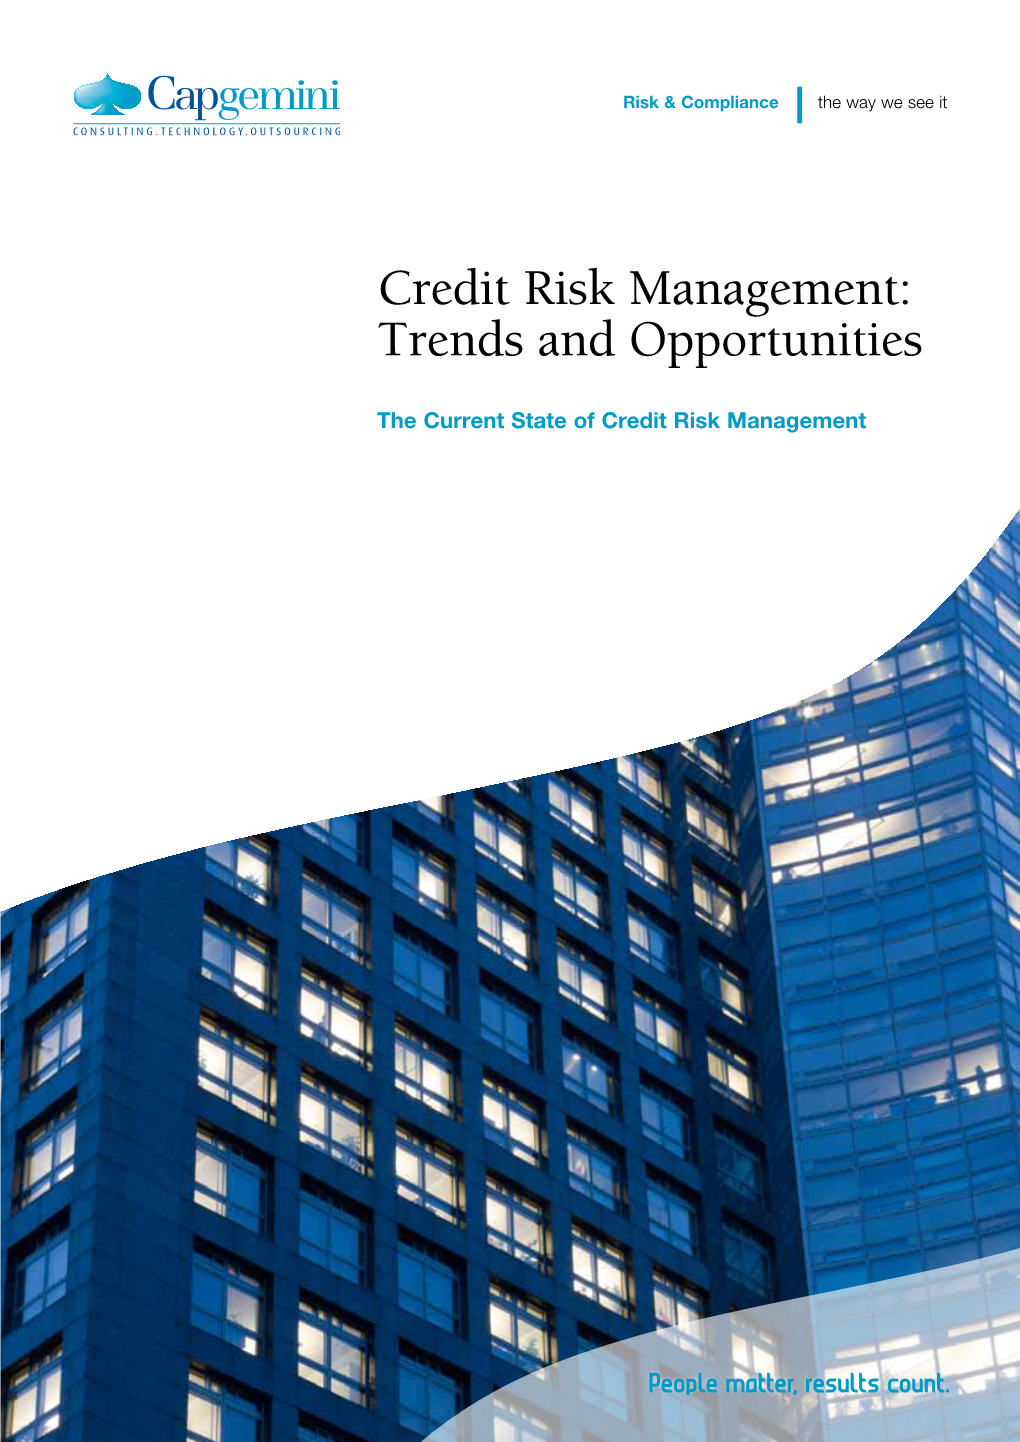 Credit Risk Management: Trends and Opportunities